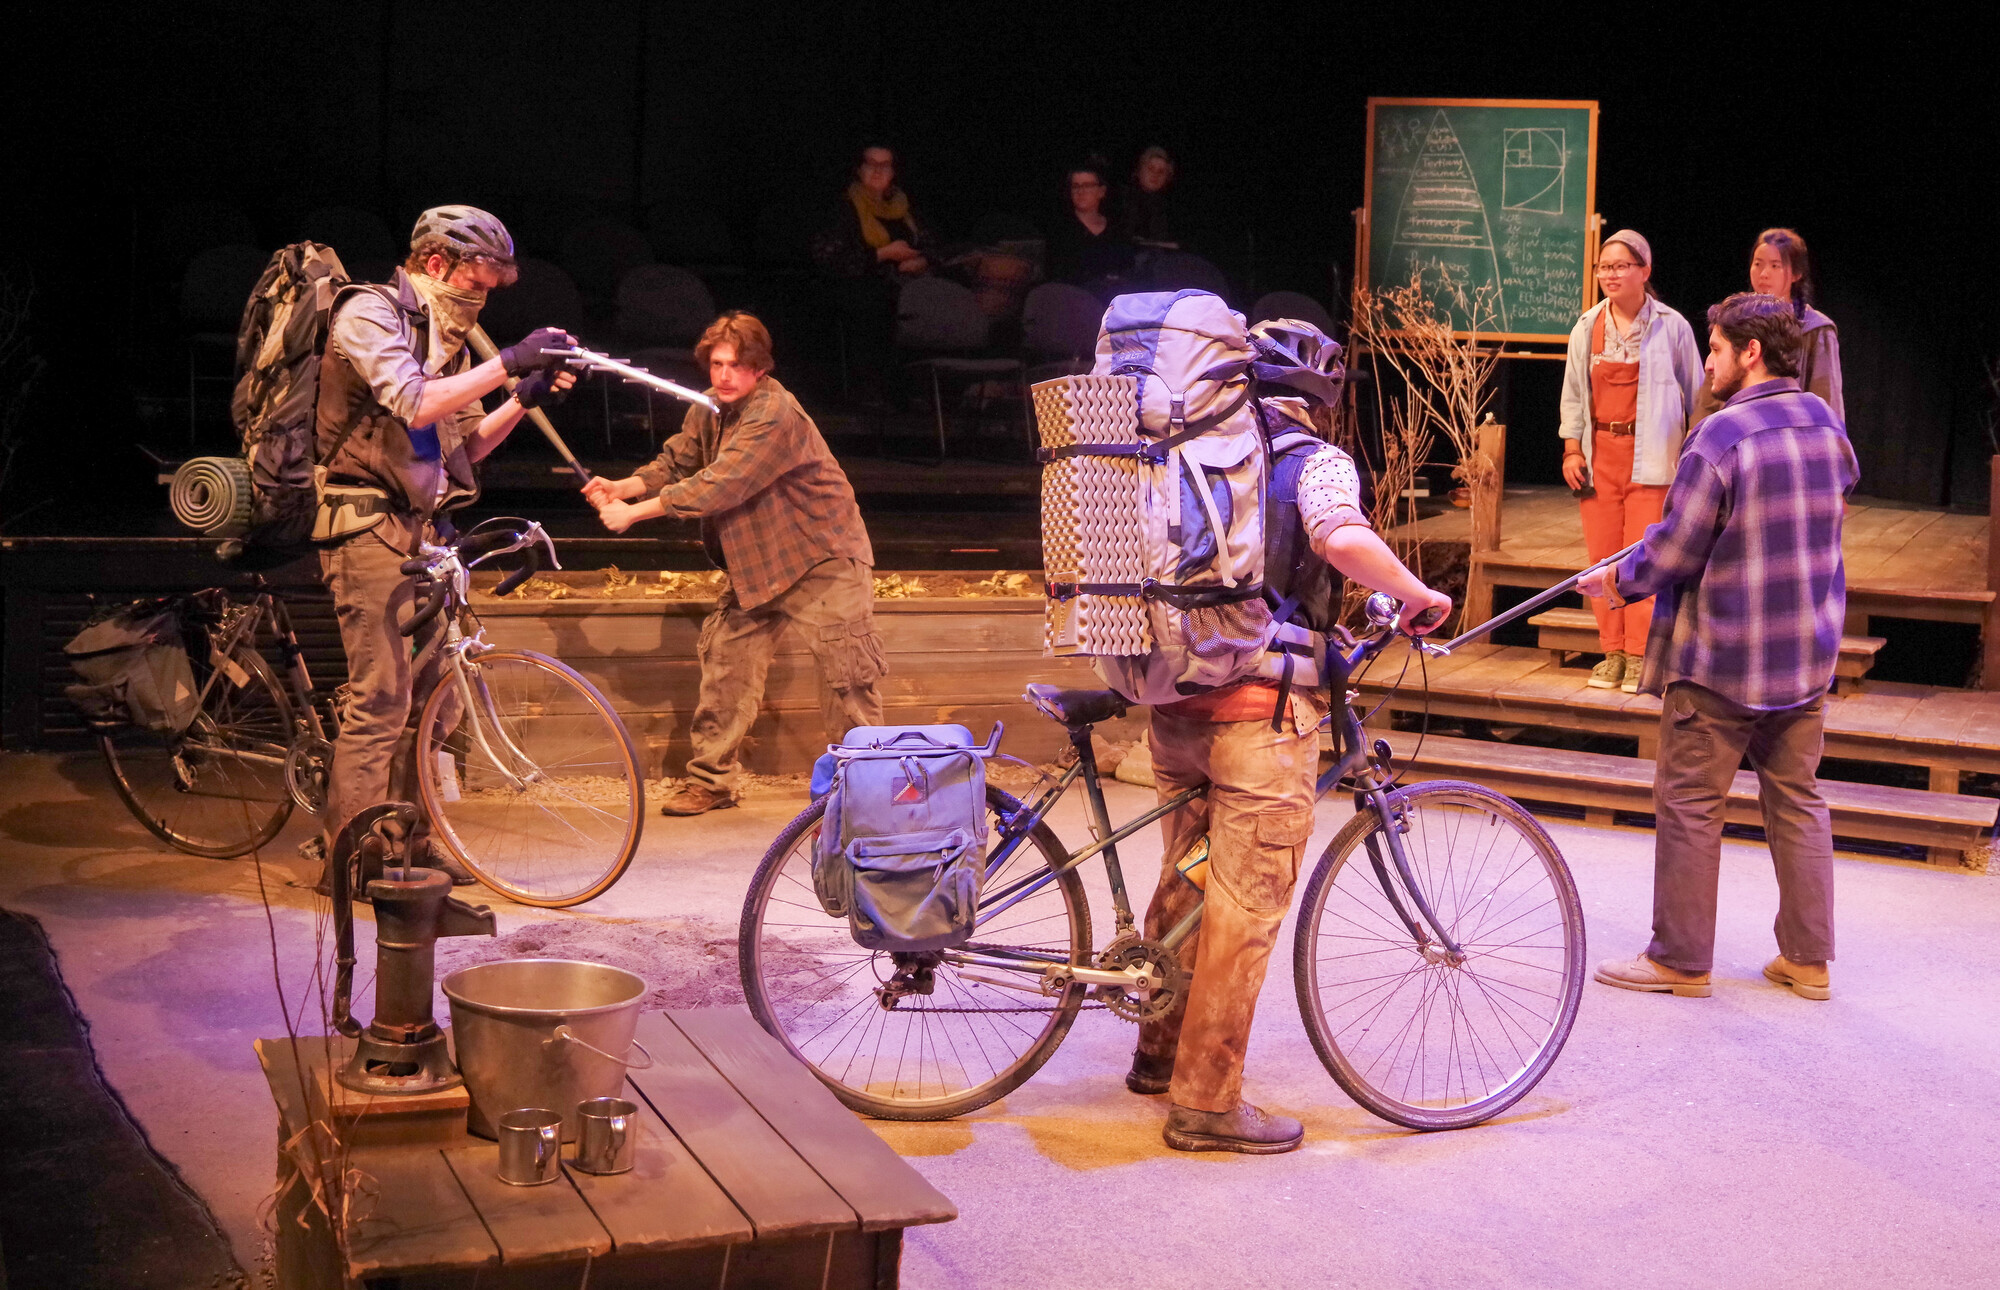 Six people on stage, one on a bike, talking excitedly amongst each other.